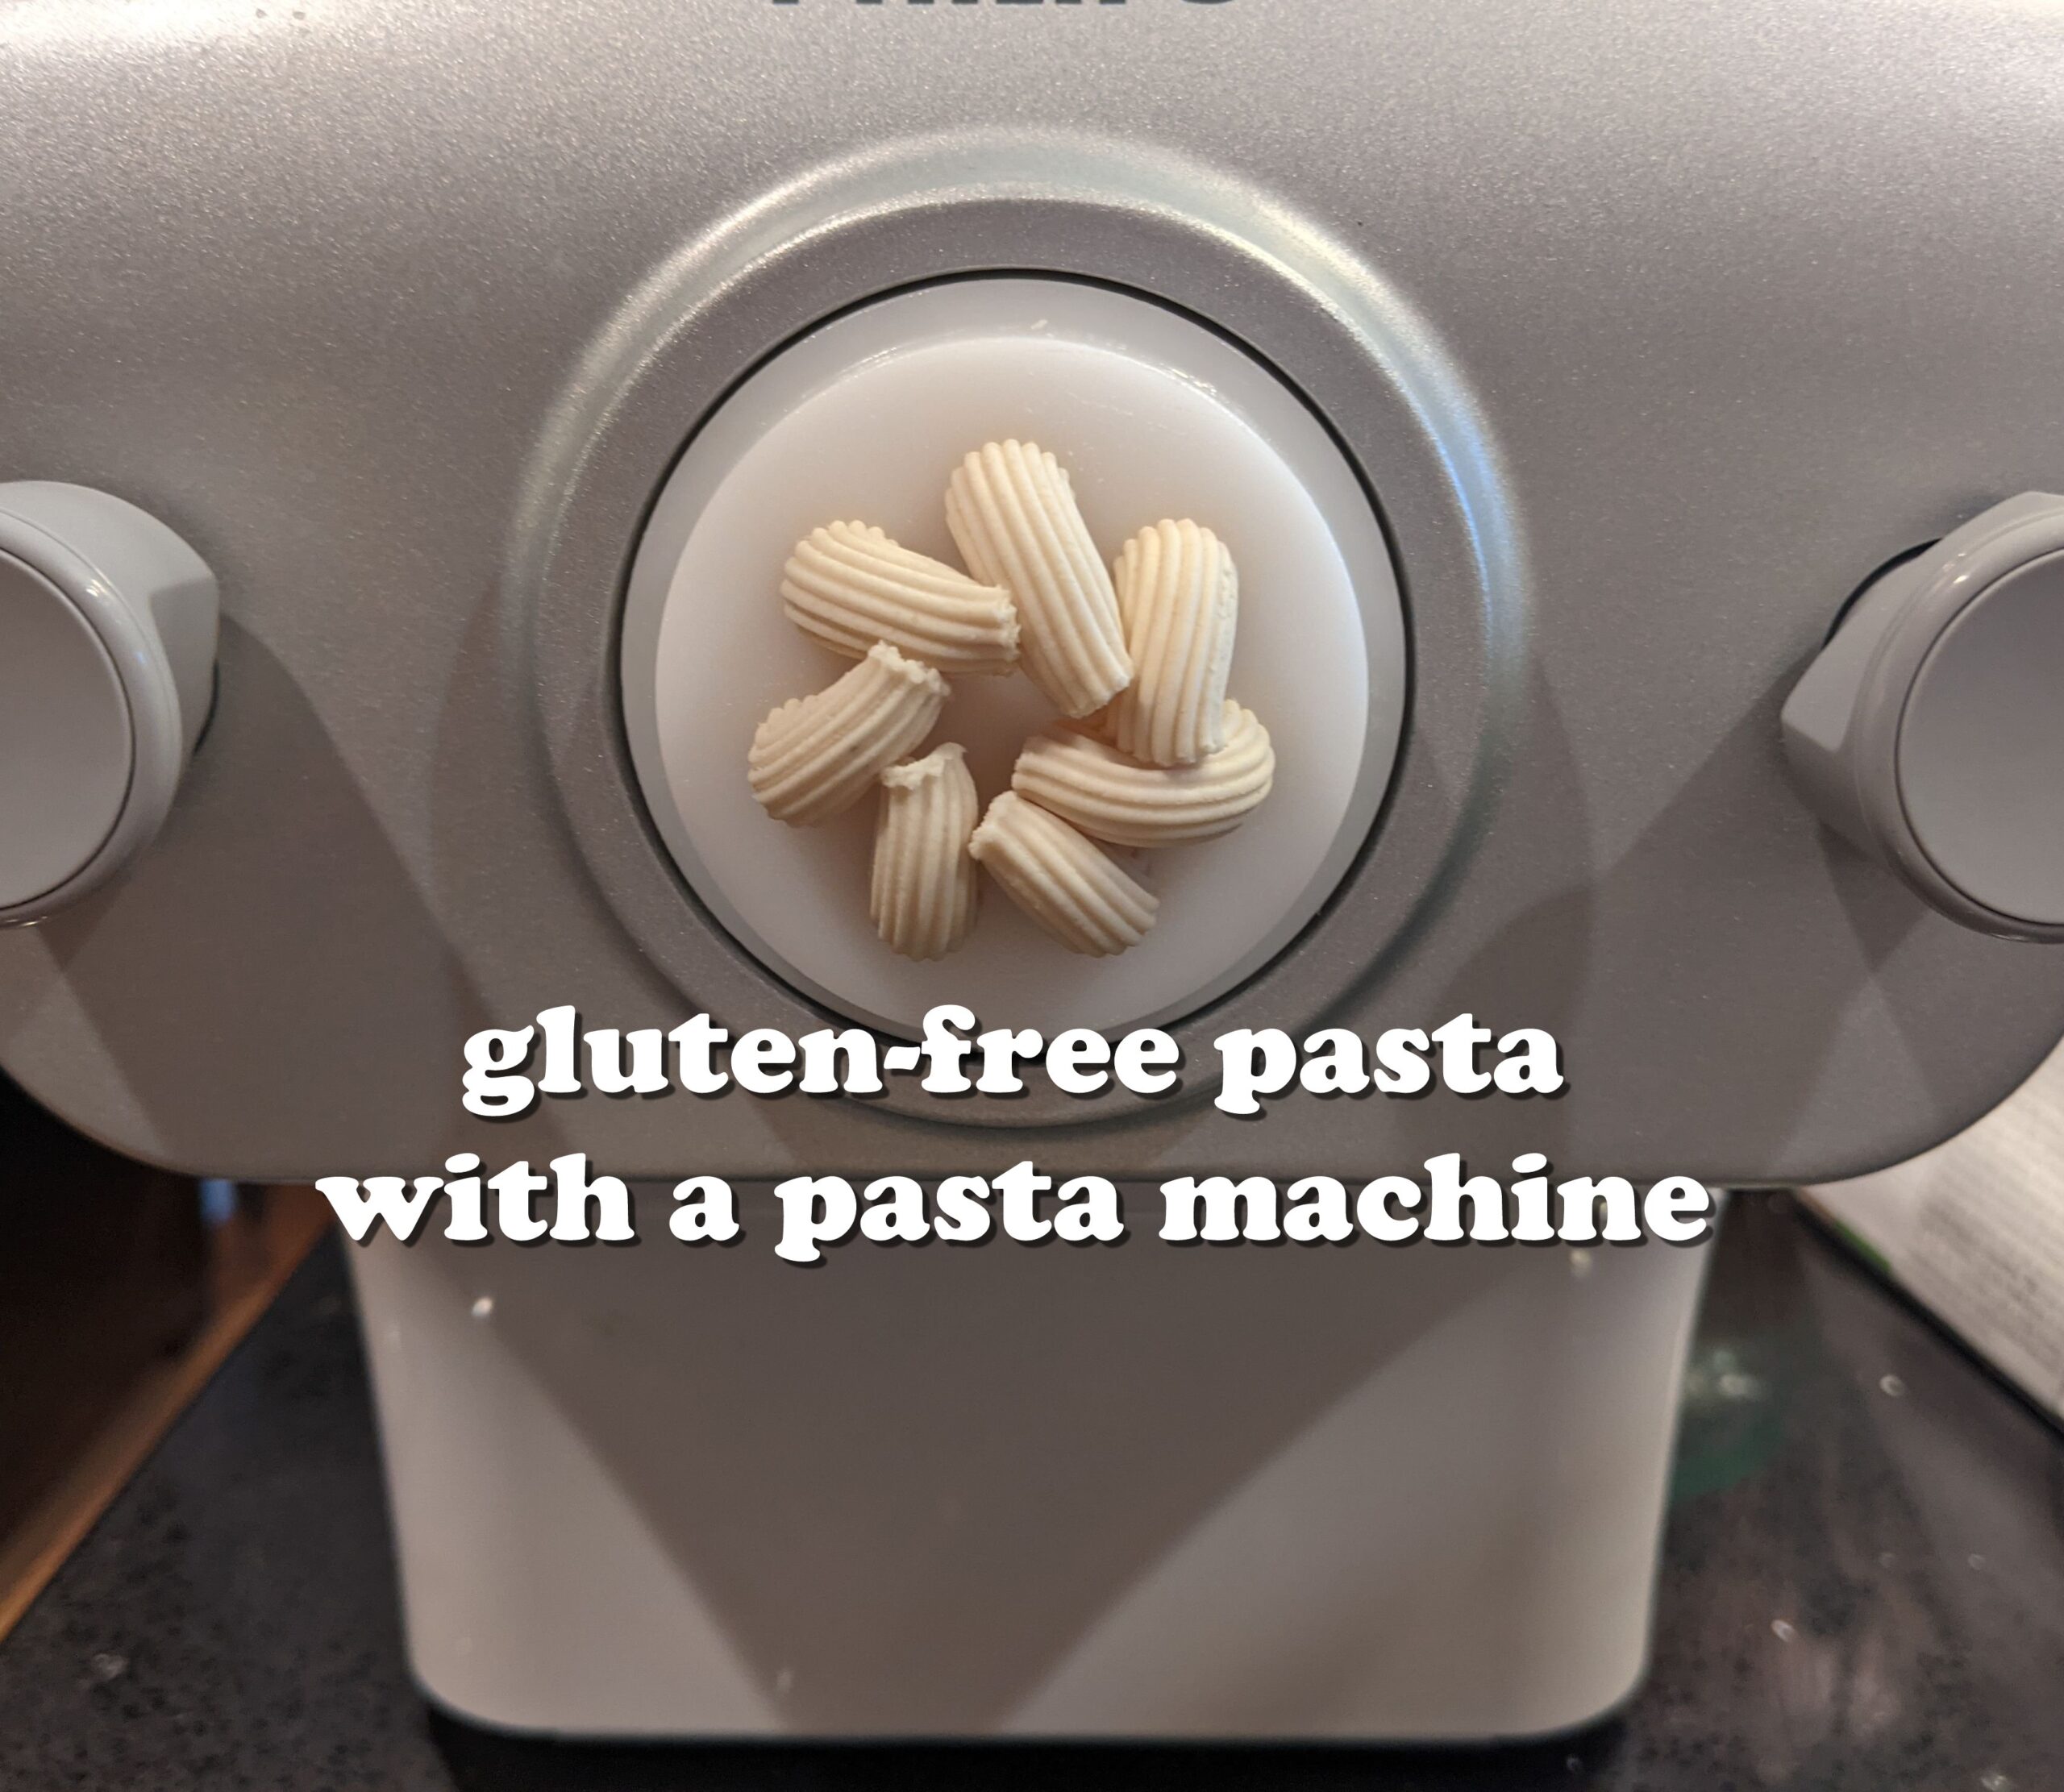 Electric Pasta Maker,automatic Pasta And Noodle Maker With 9 Different  Shapes,pasta Make Machine For Making Fresh Pasta,white